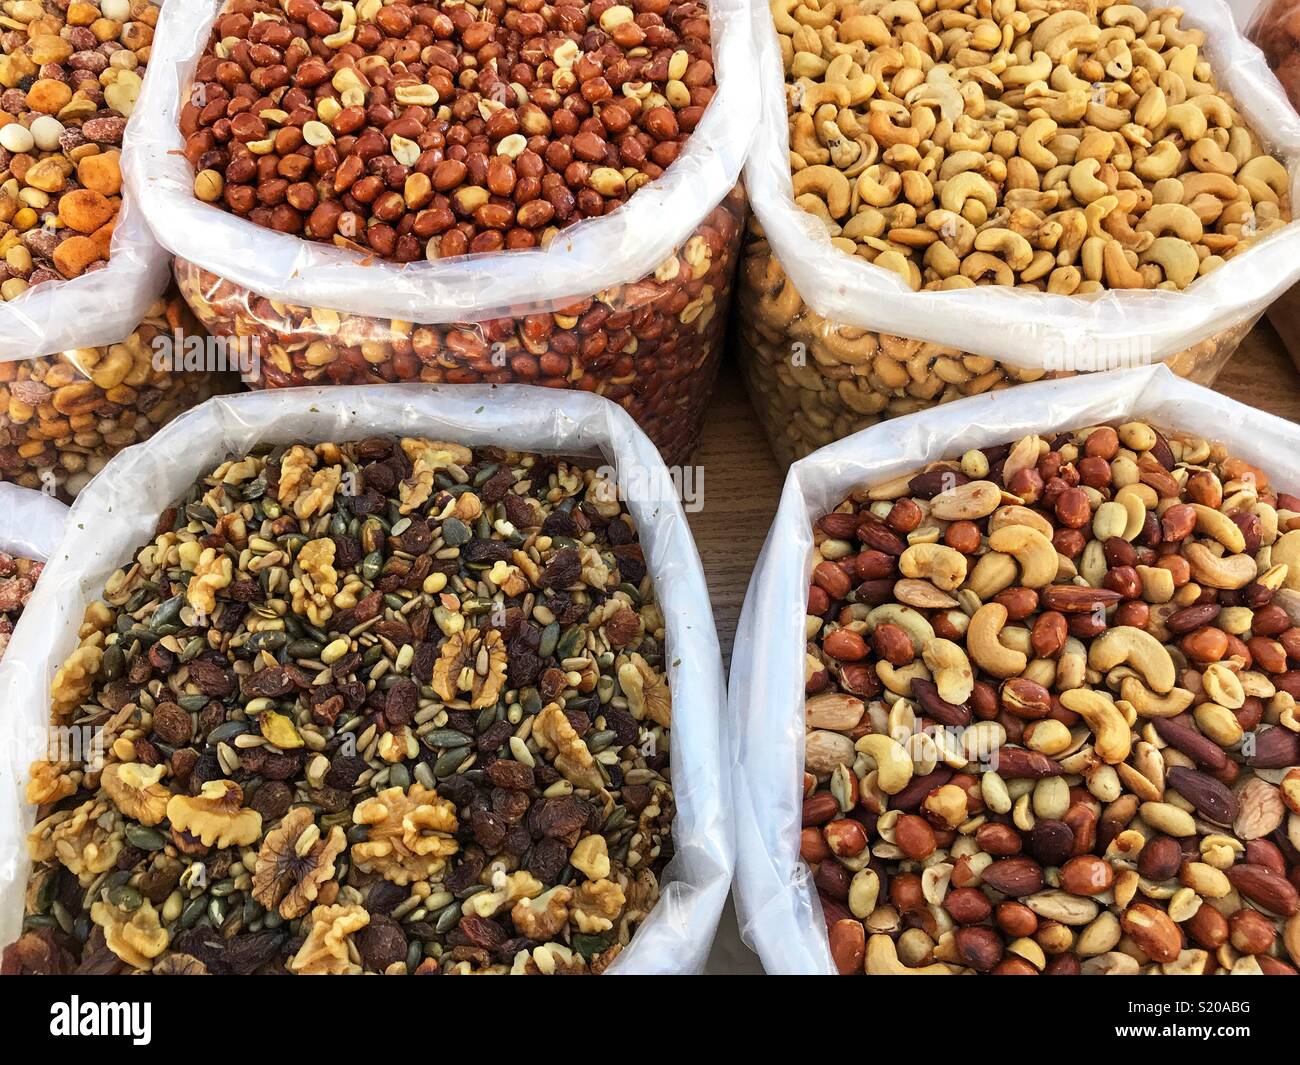 Nuts, including mixed nuts, peanuts, cashew nuts, walnuts and raisins, for sale on a market stall in Javea, Spain Stock Photo